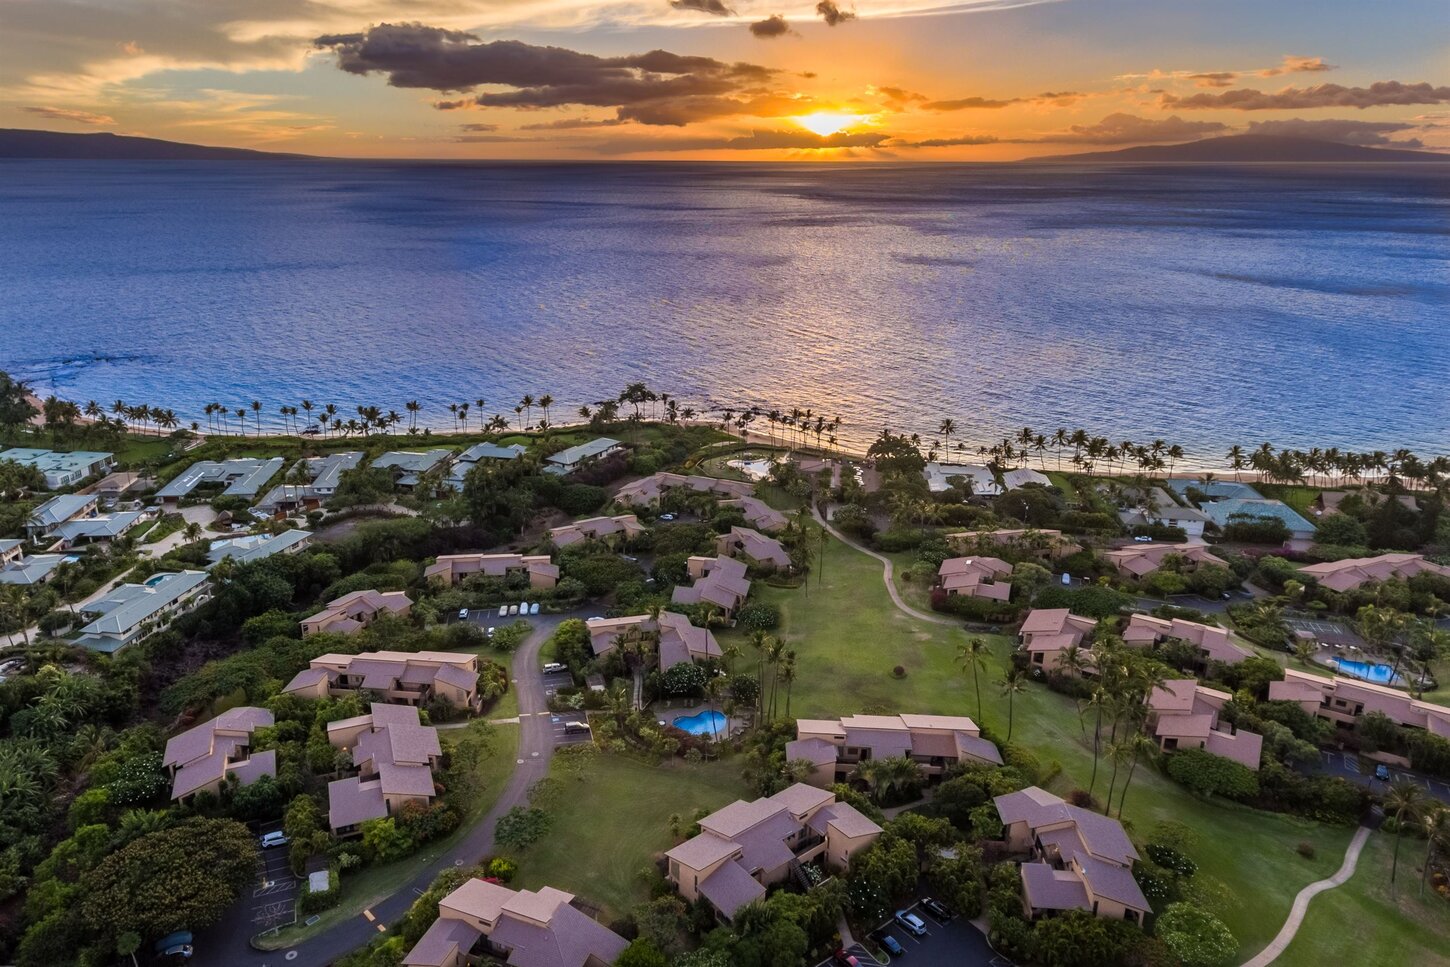 Sunsets at Ekahi can't be beat!